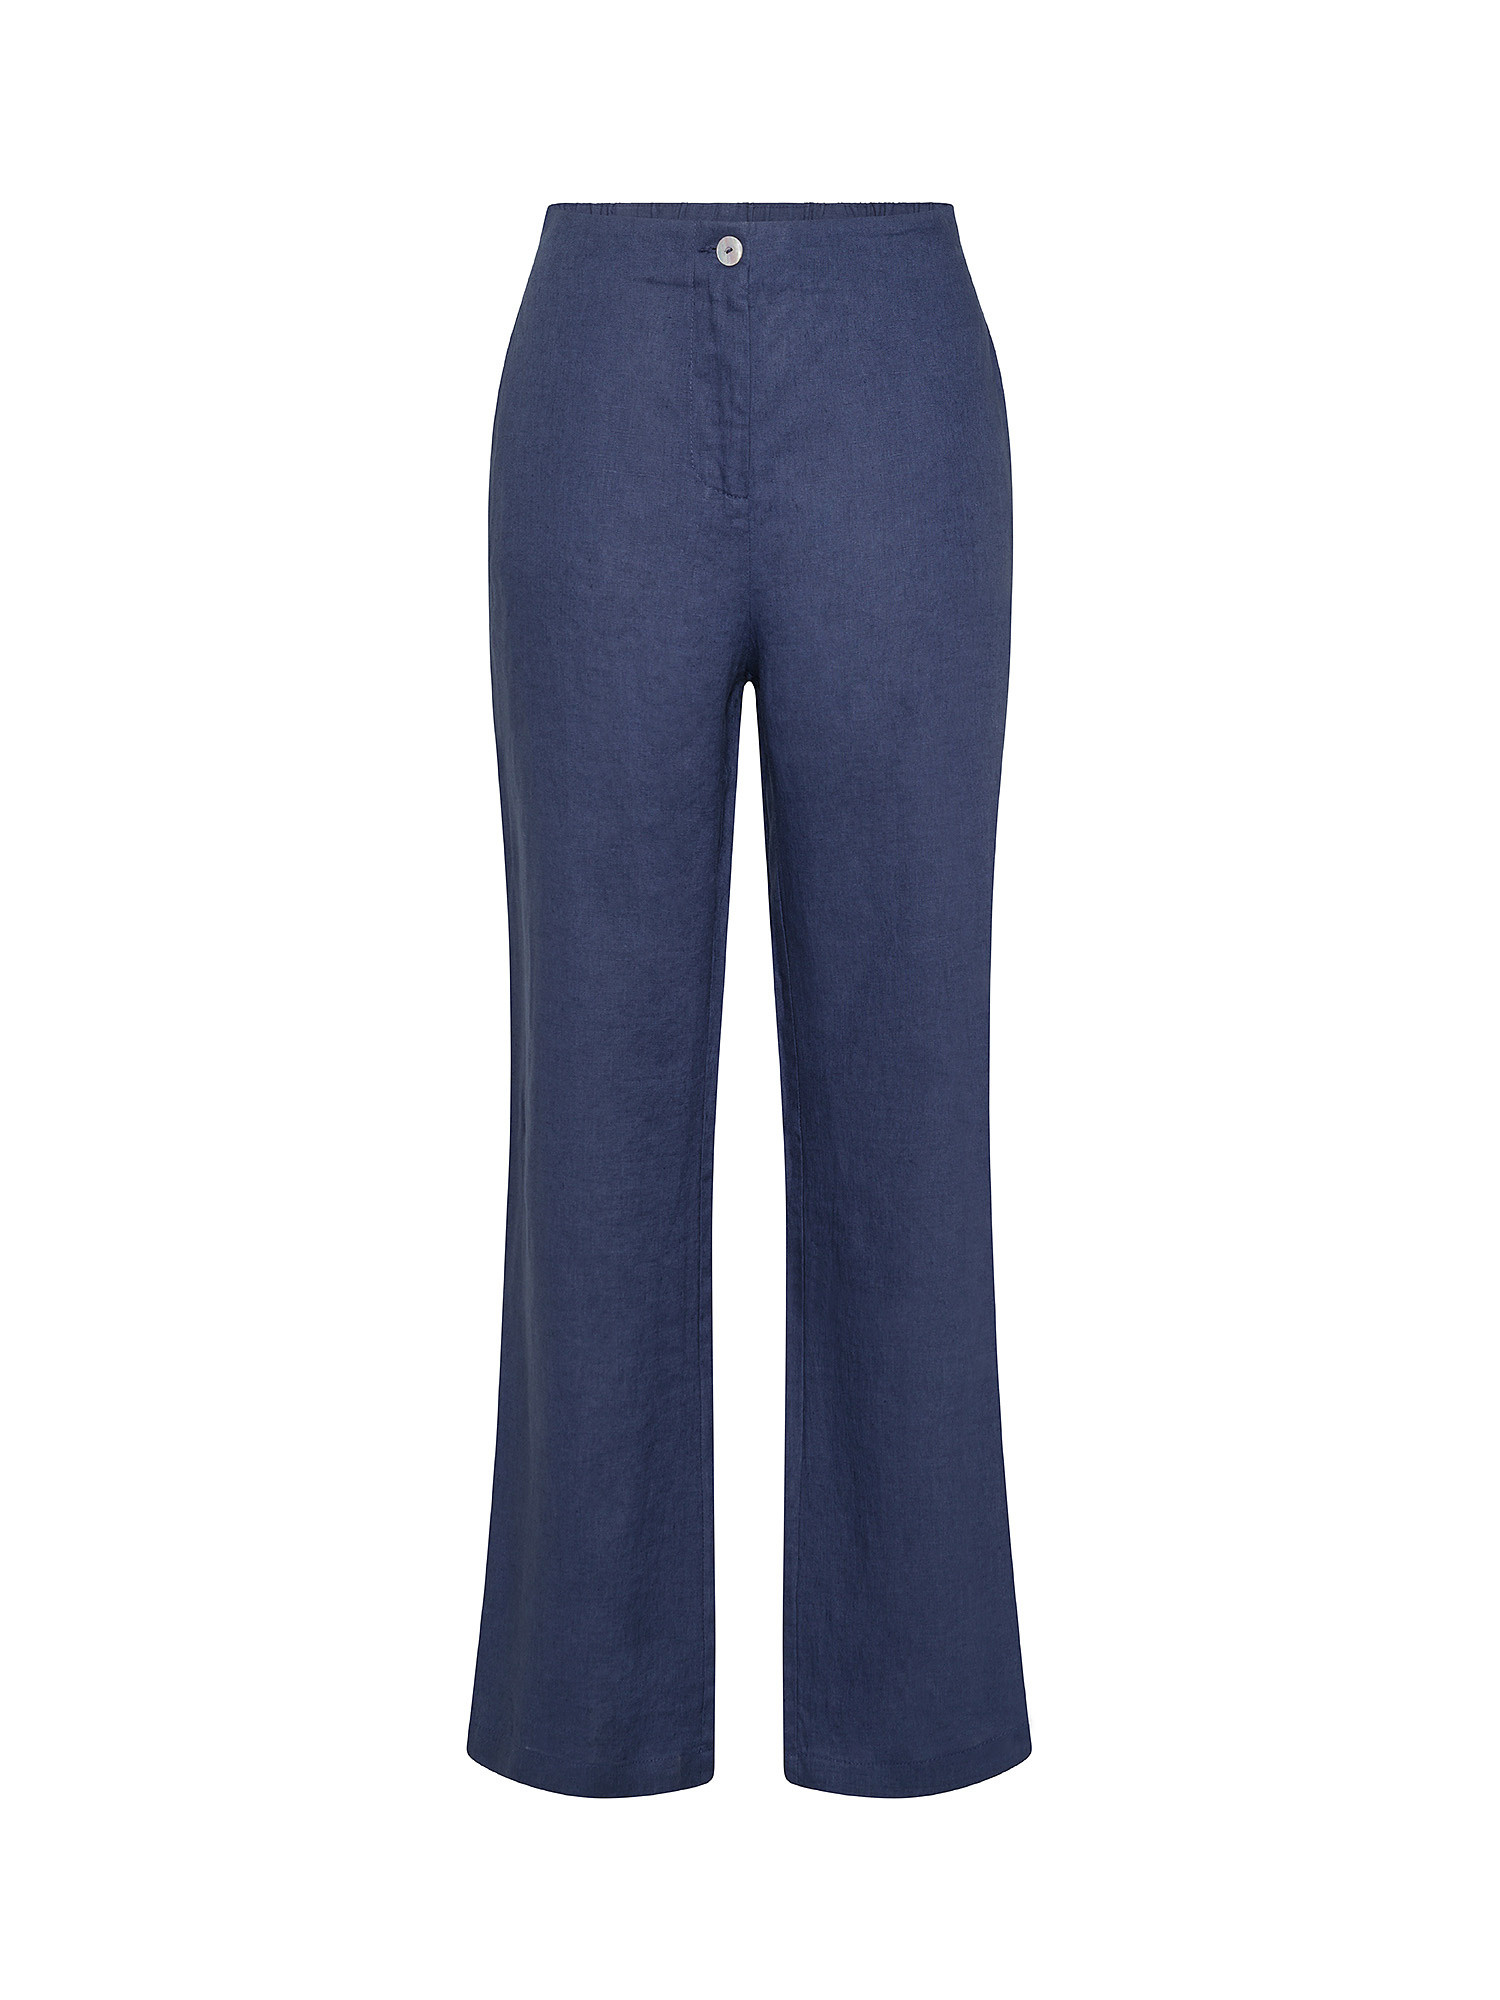 Koan - Straight linen trousers, Blue, large image number 0